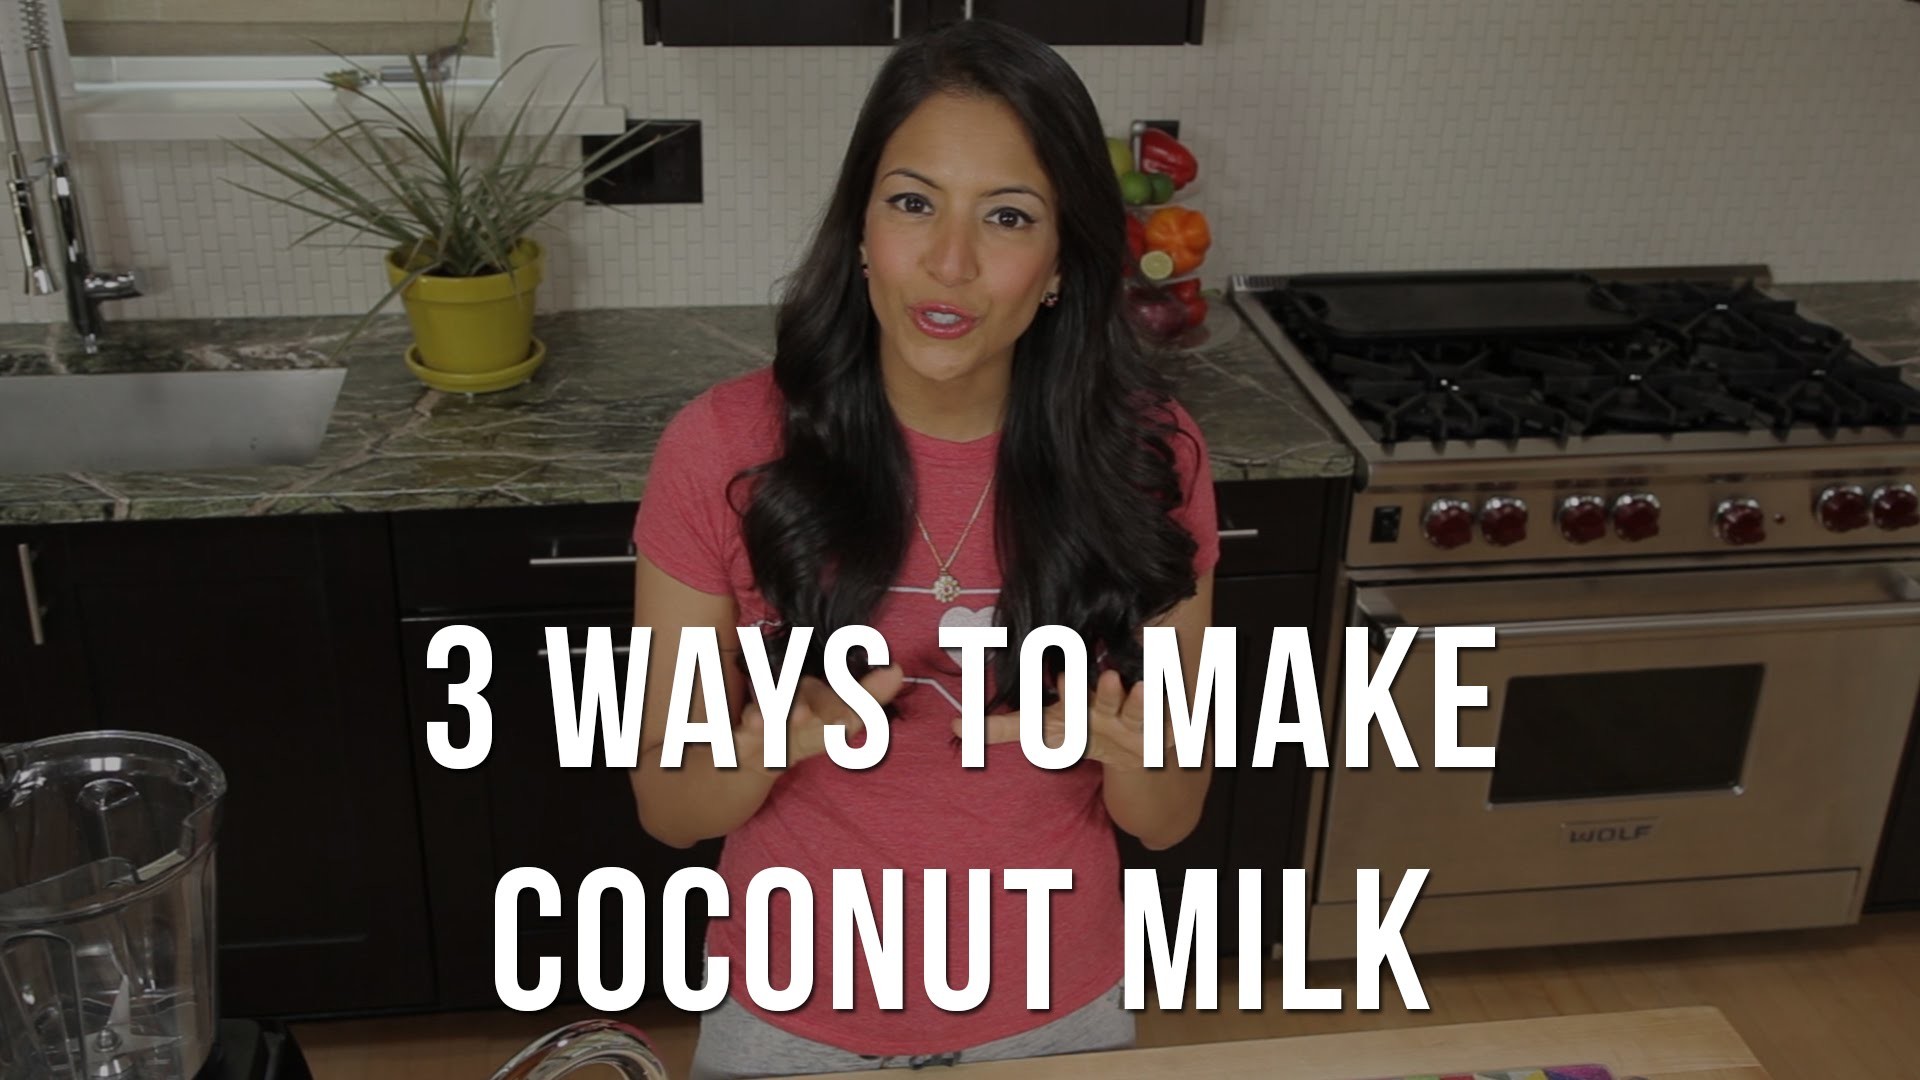 3 Ways To Make Coconut Milk (Without cracking open a coconut)